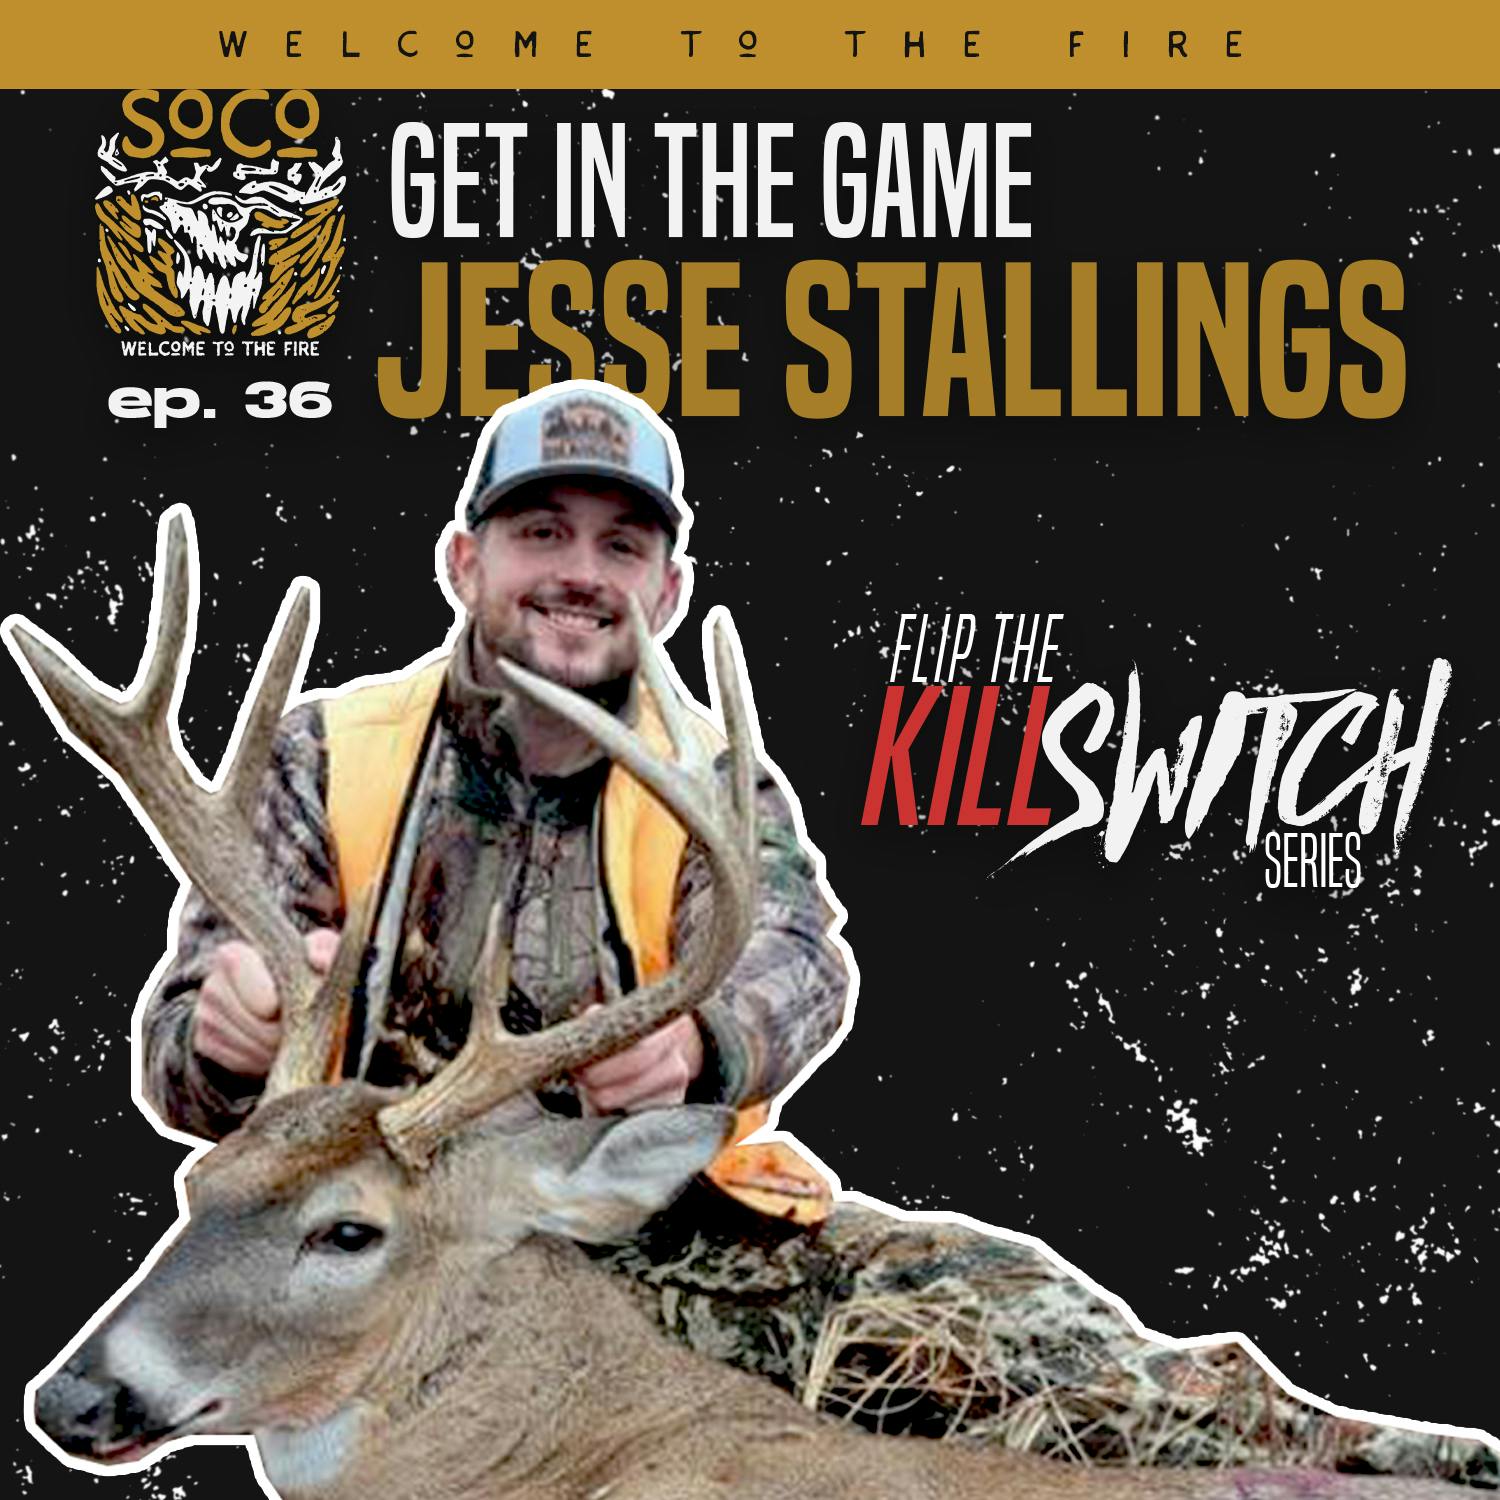 Ep. 36: Flipping The Kill Switch series | Quit Watching Bucks From A Distance & Get In The Game! with Jesse Stallings